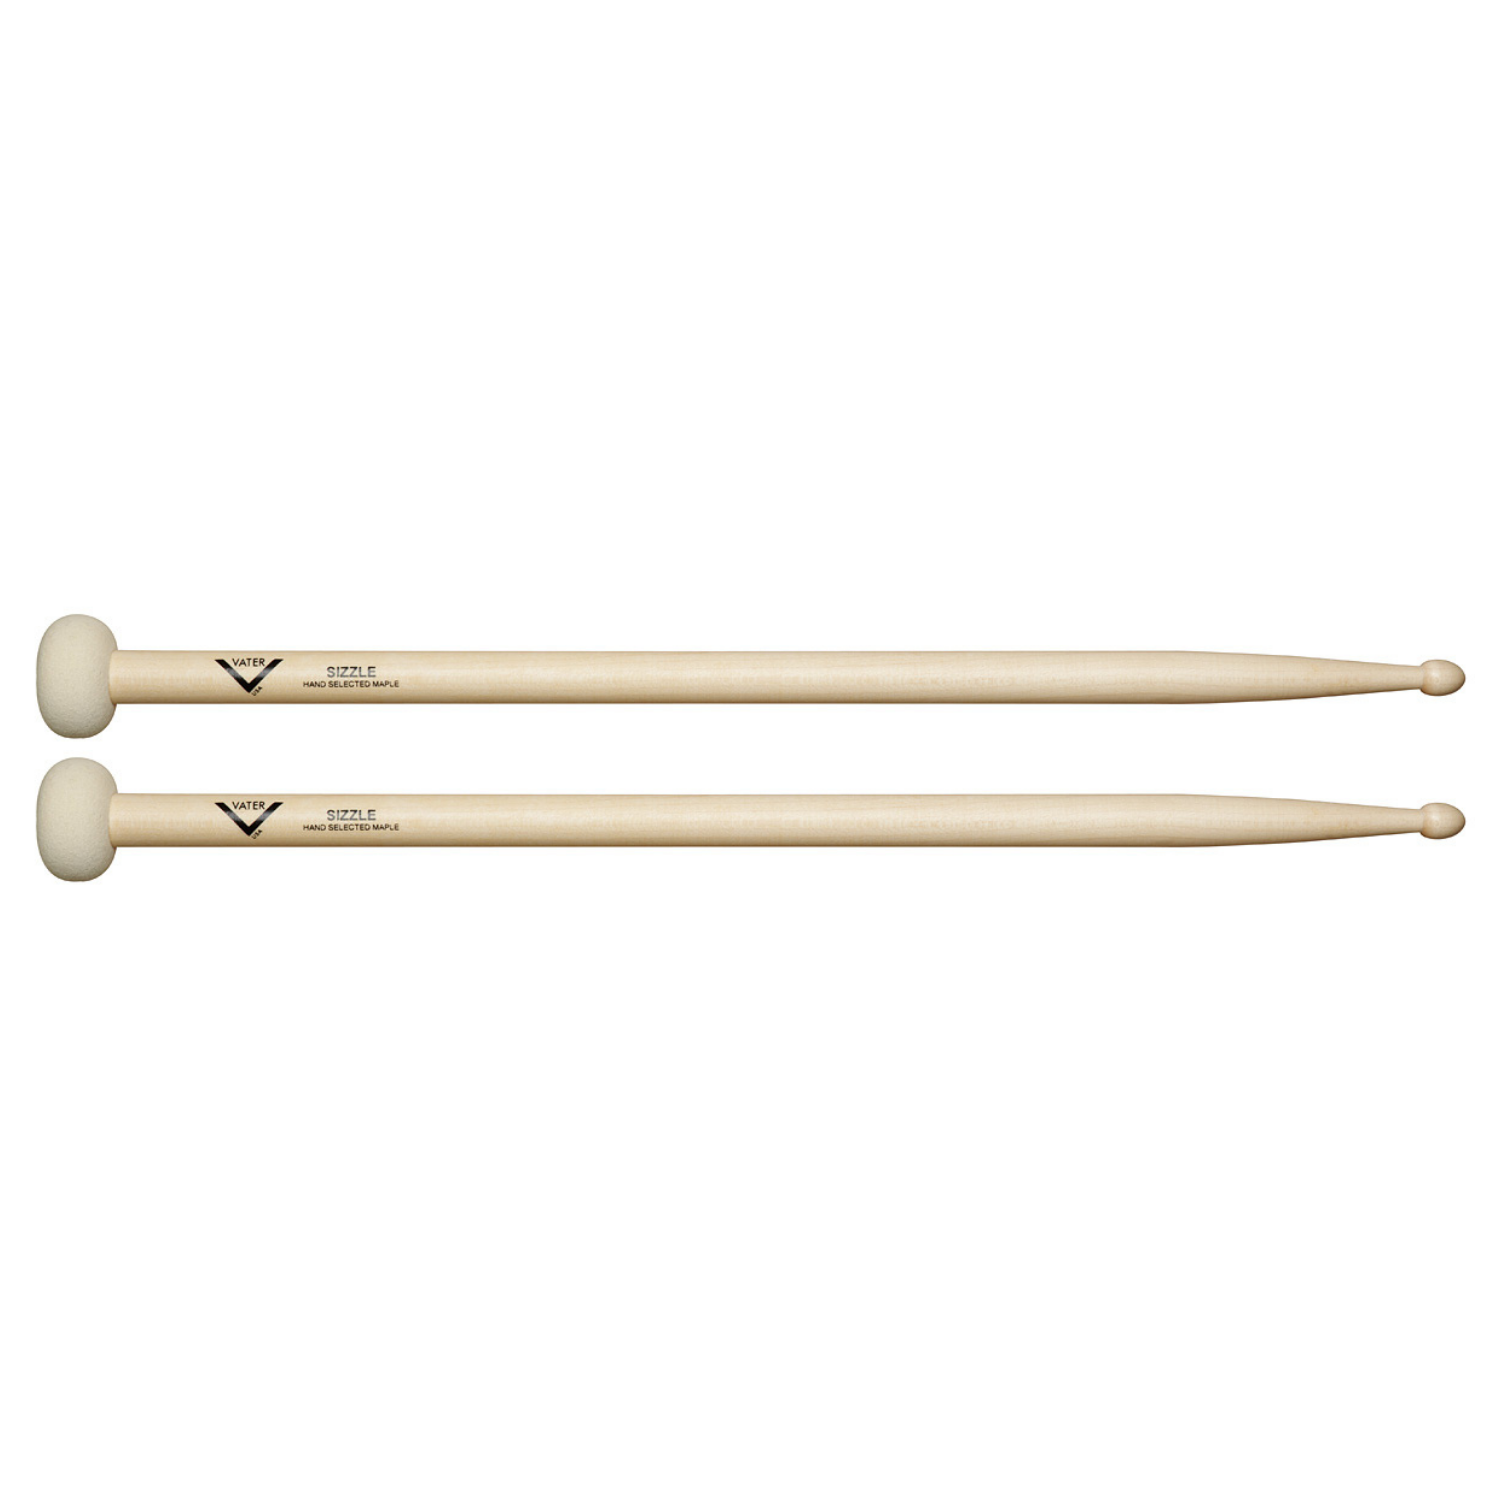 Vater VMSZL Sizzle Timpani, Drumset & Cymbal Mallet